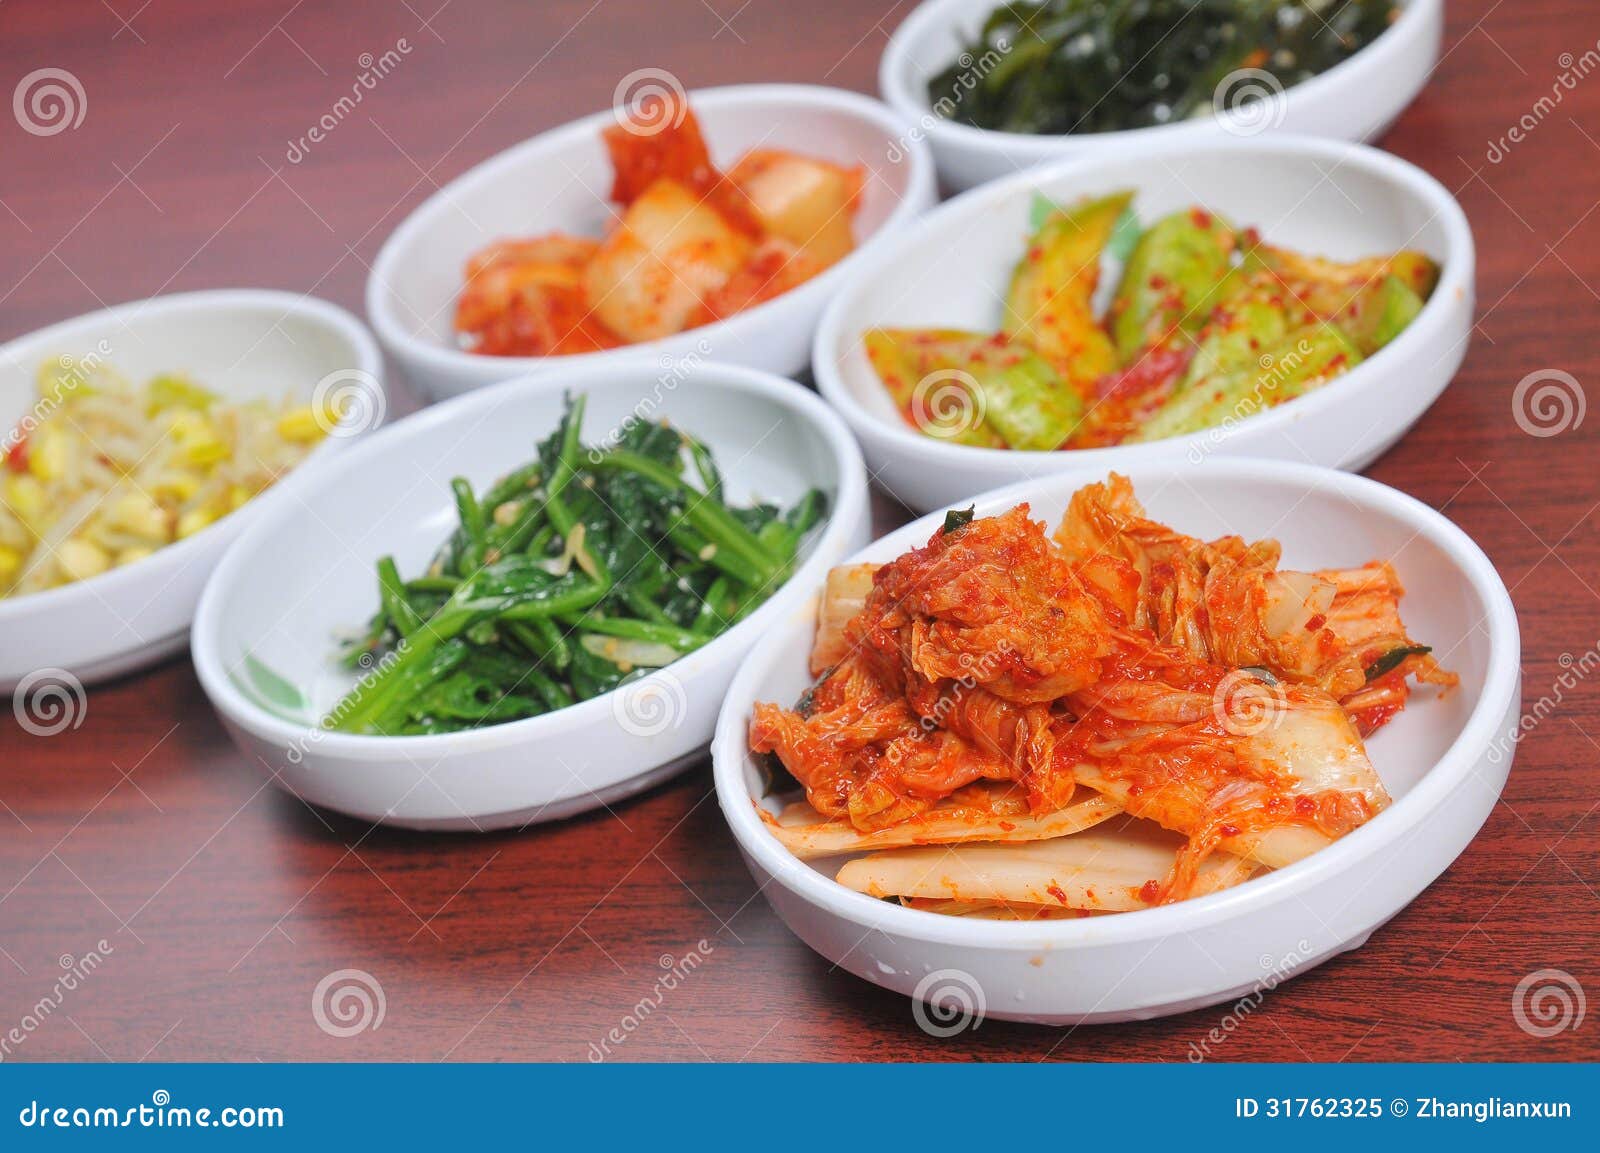  Korean appetizers  stock image Image of healthy asia 